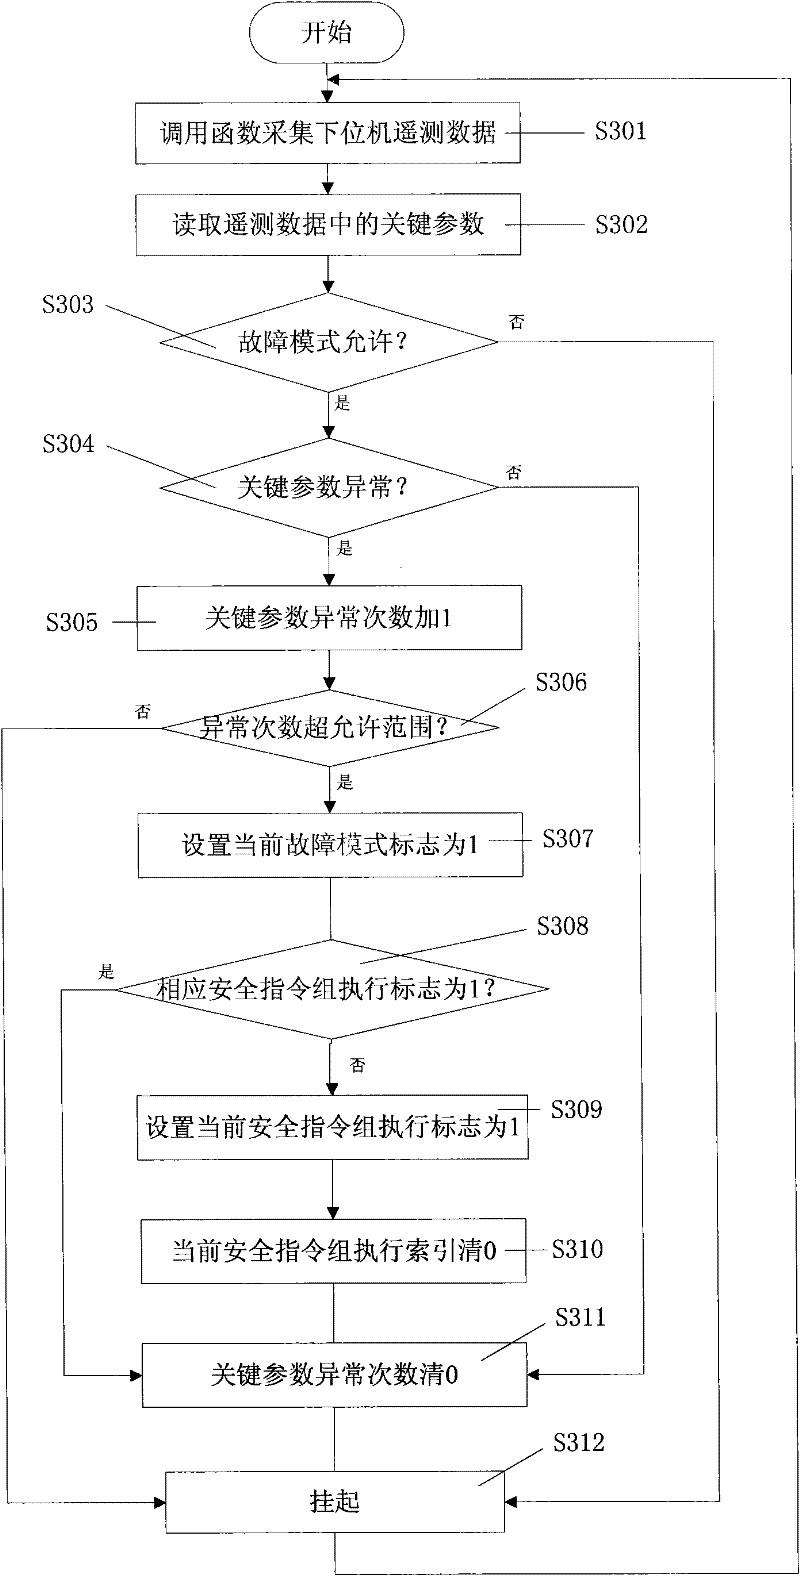 Fault recognition and processing method based on satellite-bone bus